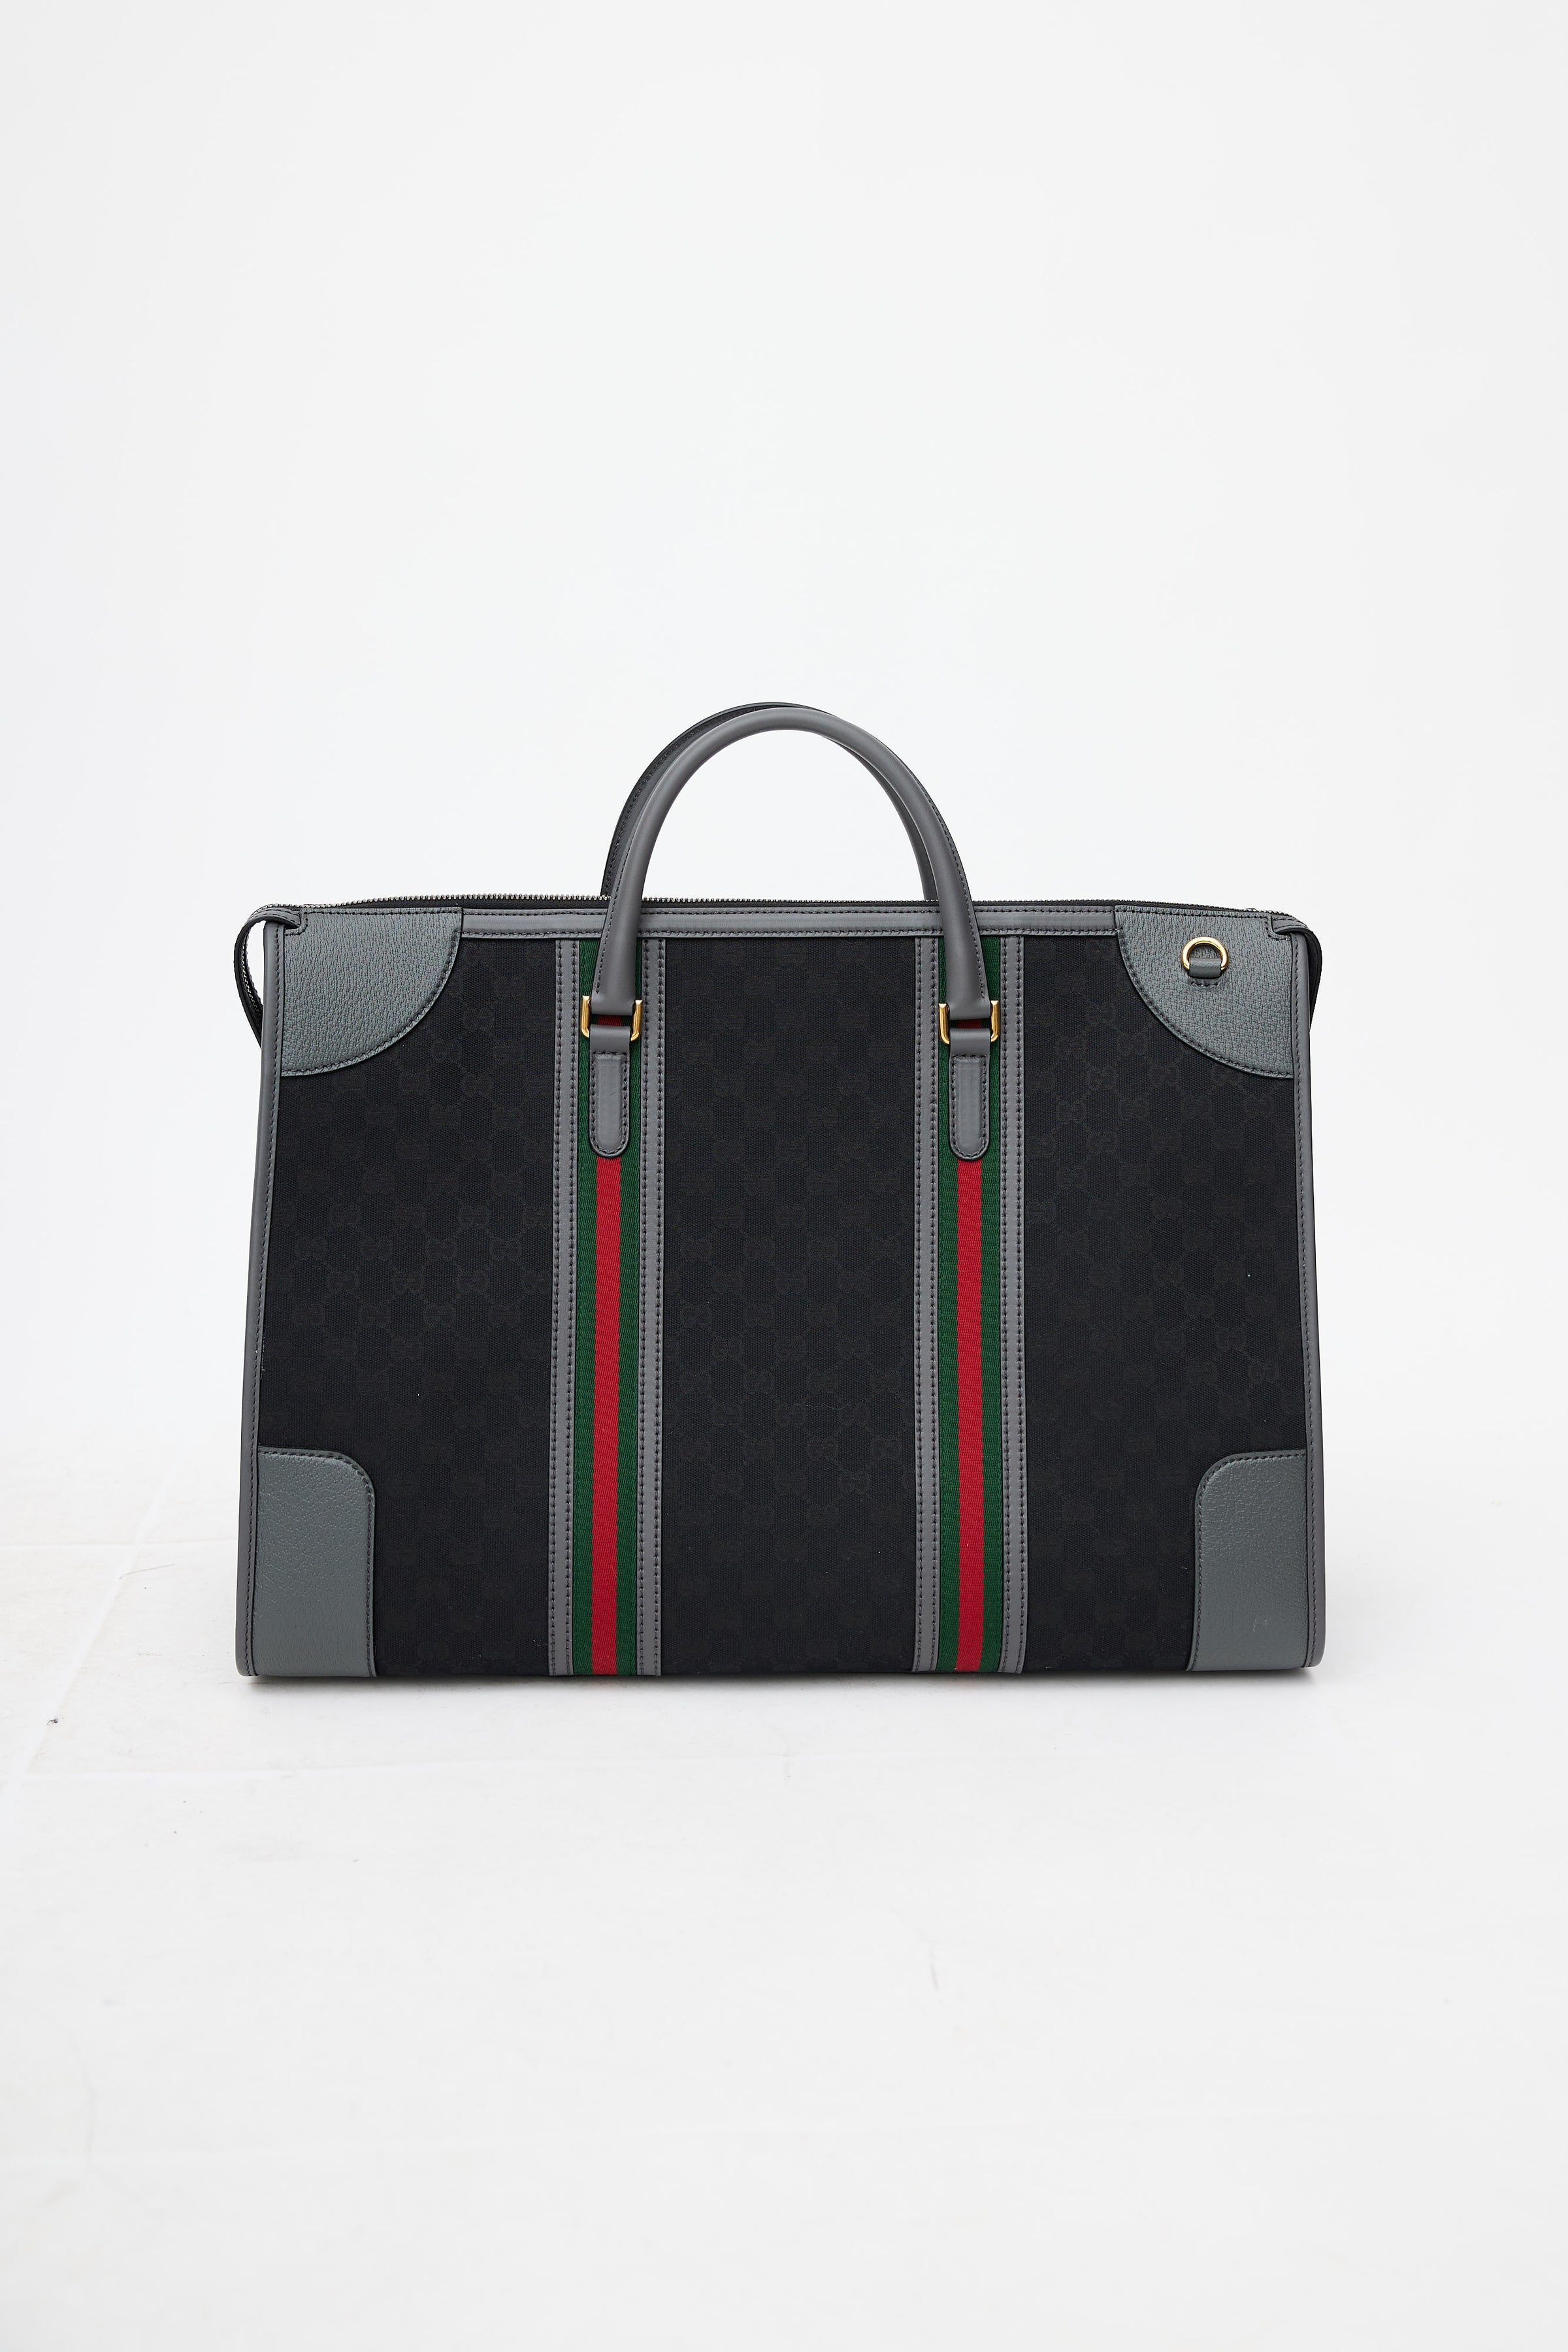 Gucci // Black & Grey GG Canvas Large Bauletto Duffle Bag – VSP Consignment